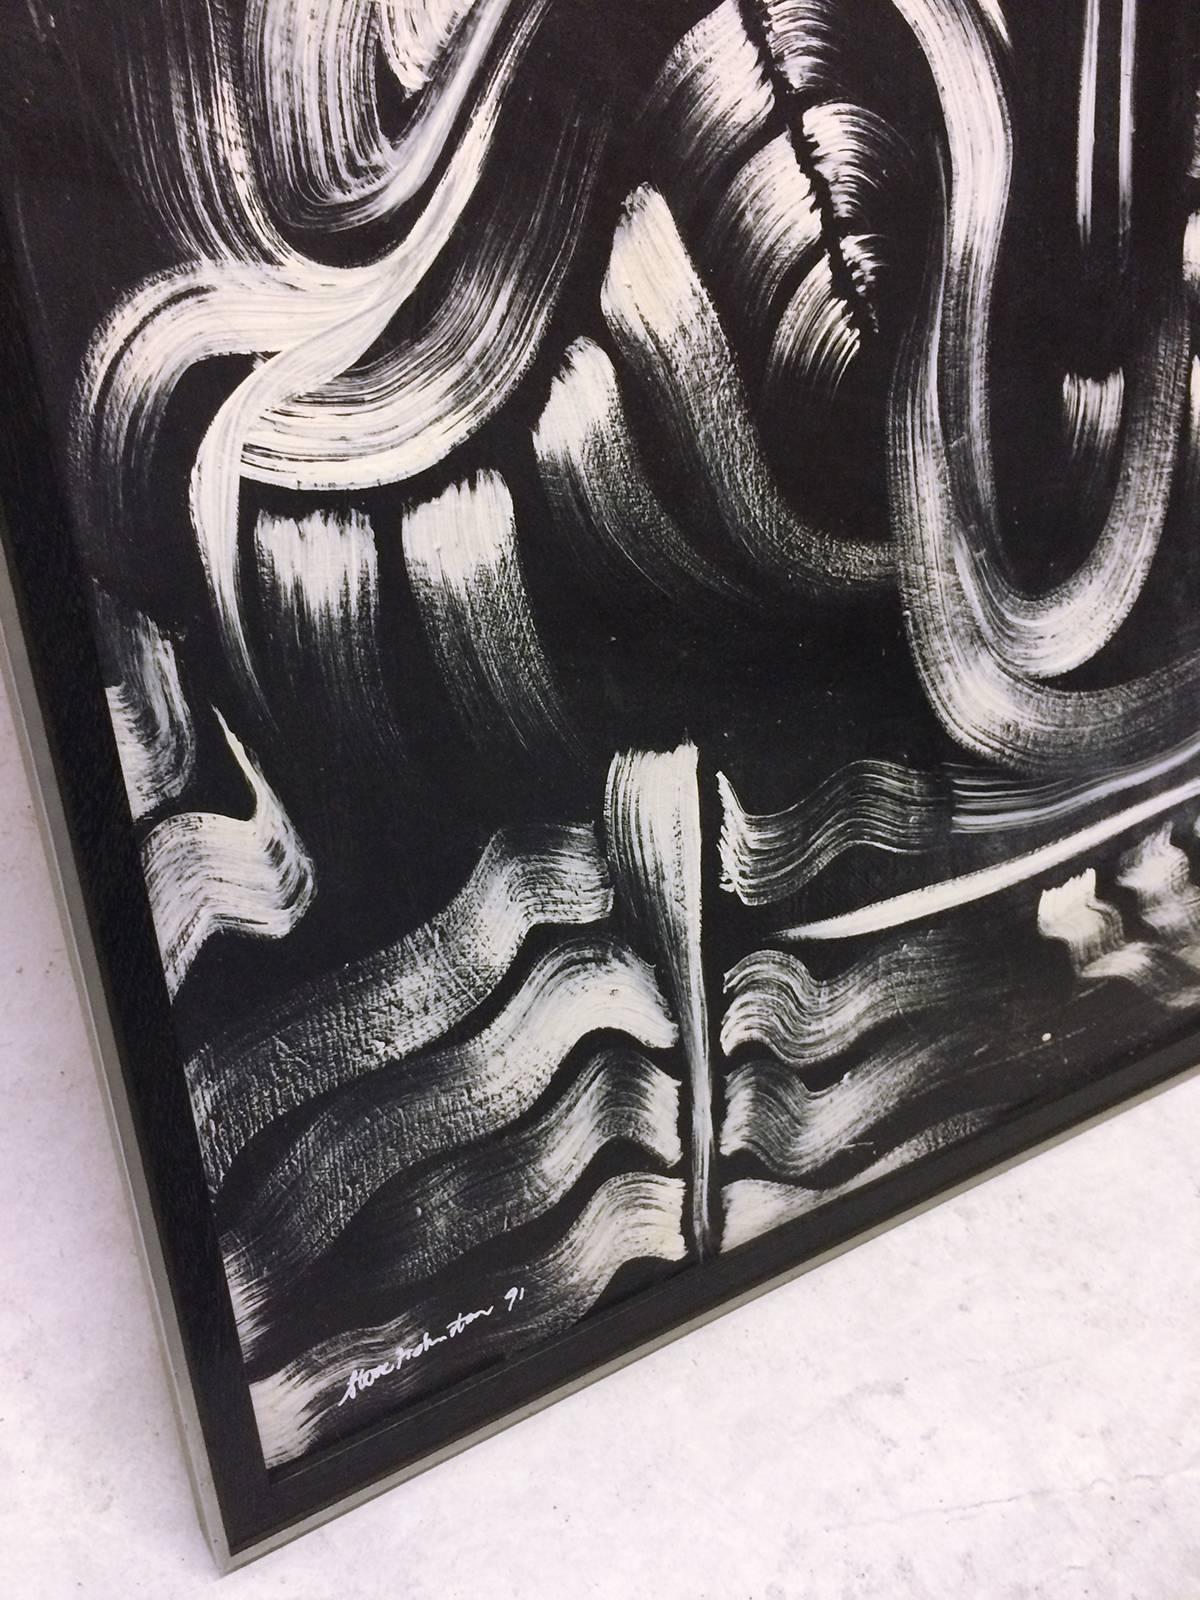 Energetic black and white abstract oil painting on panel. White brush strokes on a black ground produce an enigmatic almost surrealist feeling .
 Signed 